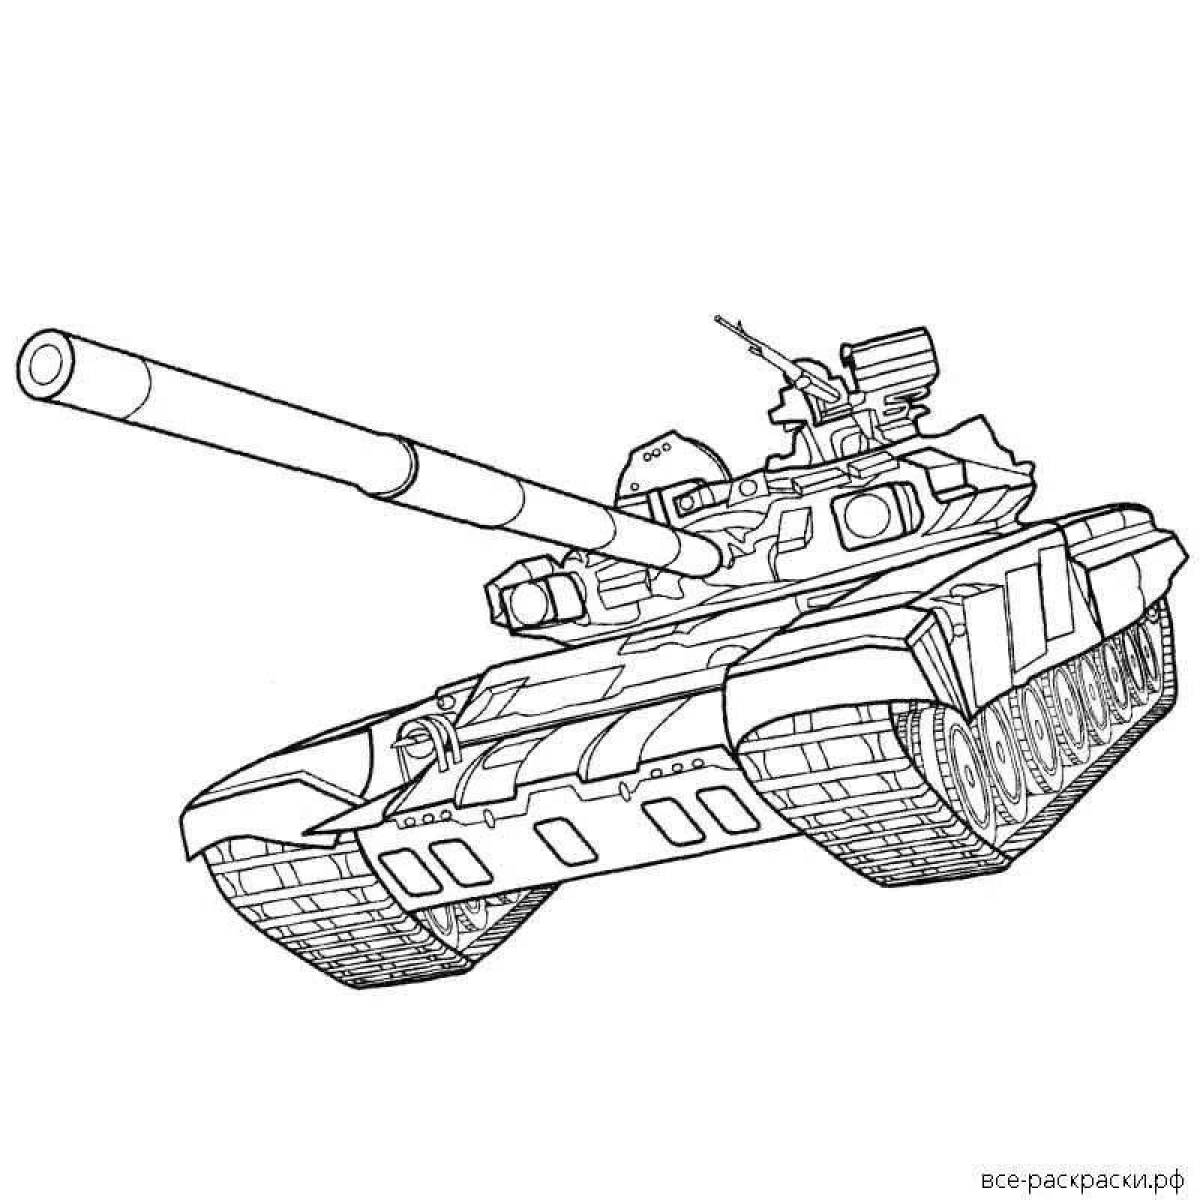 Coloring page for spectacular armata tank